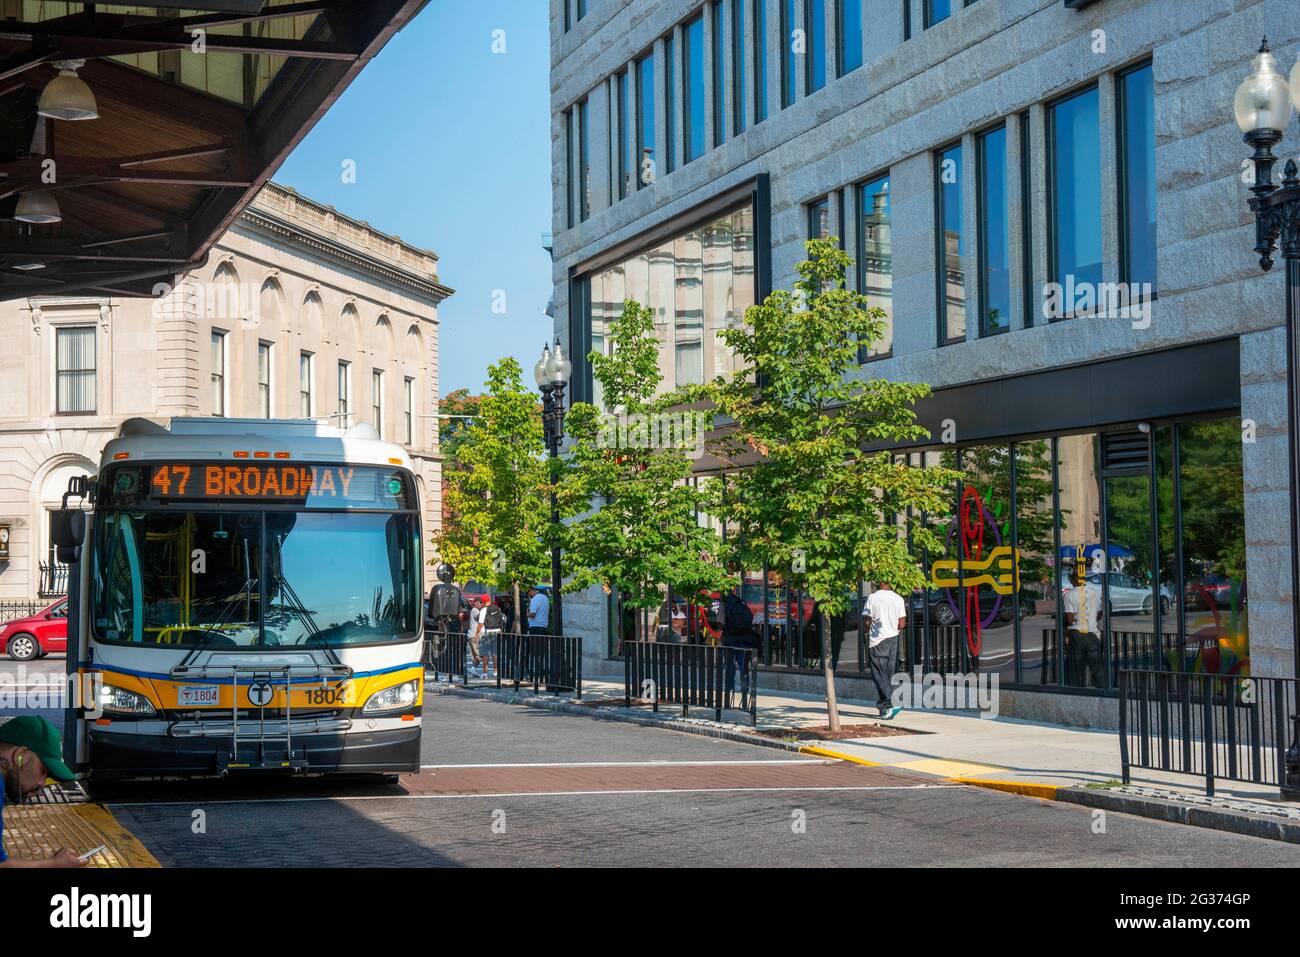 Bus nº 47 in Roxbury bus station to Broadway Boston Massachusetts USA.  Sasaki, in collaboration with the Netherlands-based design firm Mecanoo, worke Stock Photo